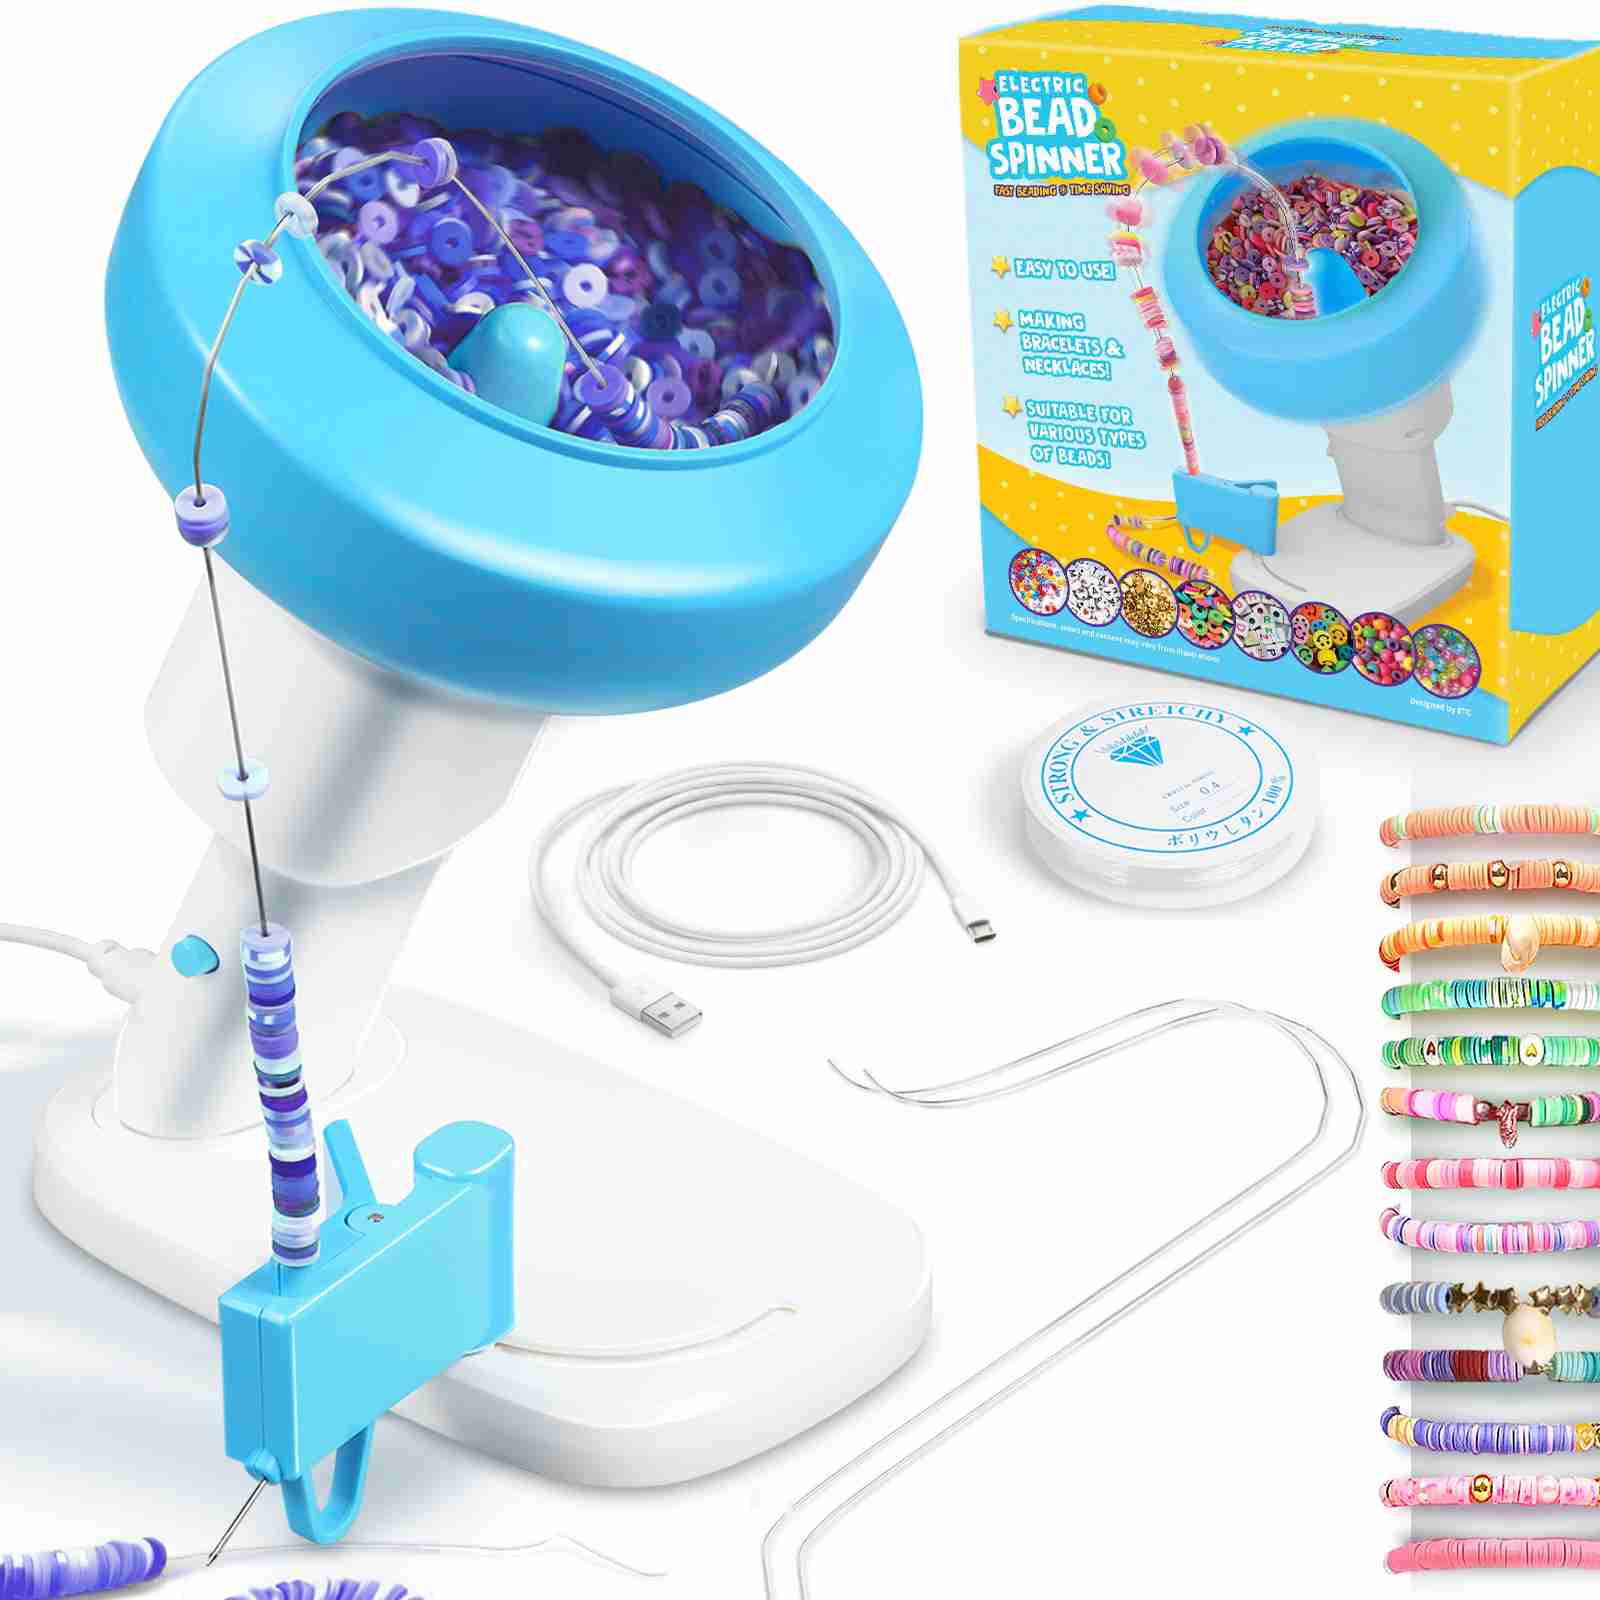 bead-spinner with cash back rebate